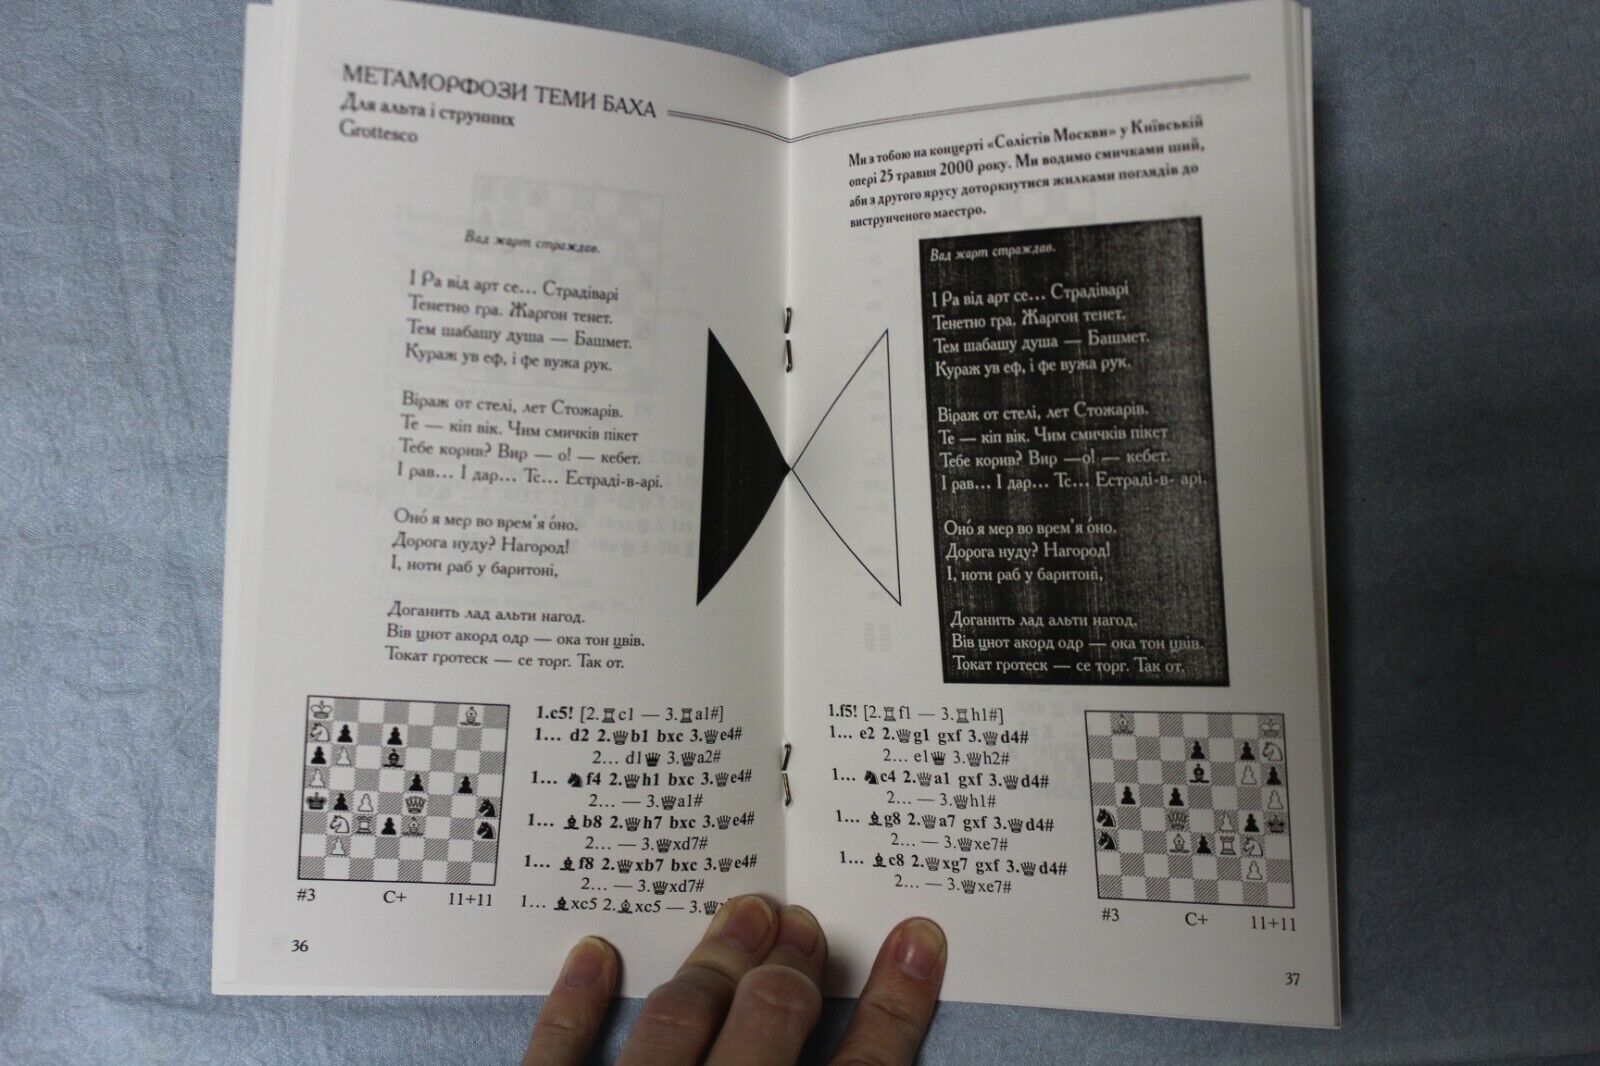 11135.Chess Book: Сheckered Сontinent (chess composition), 2003